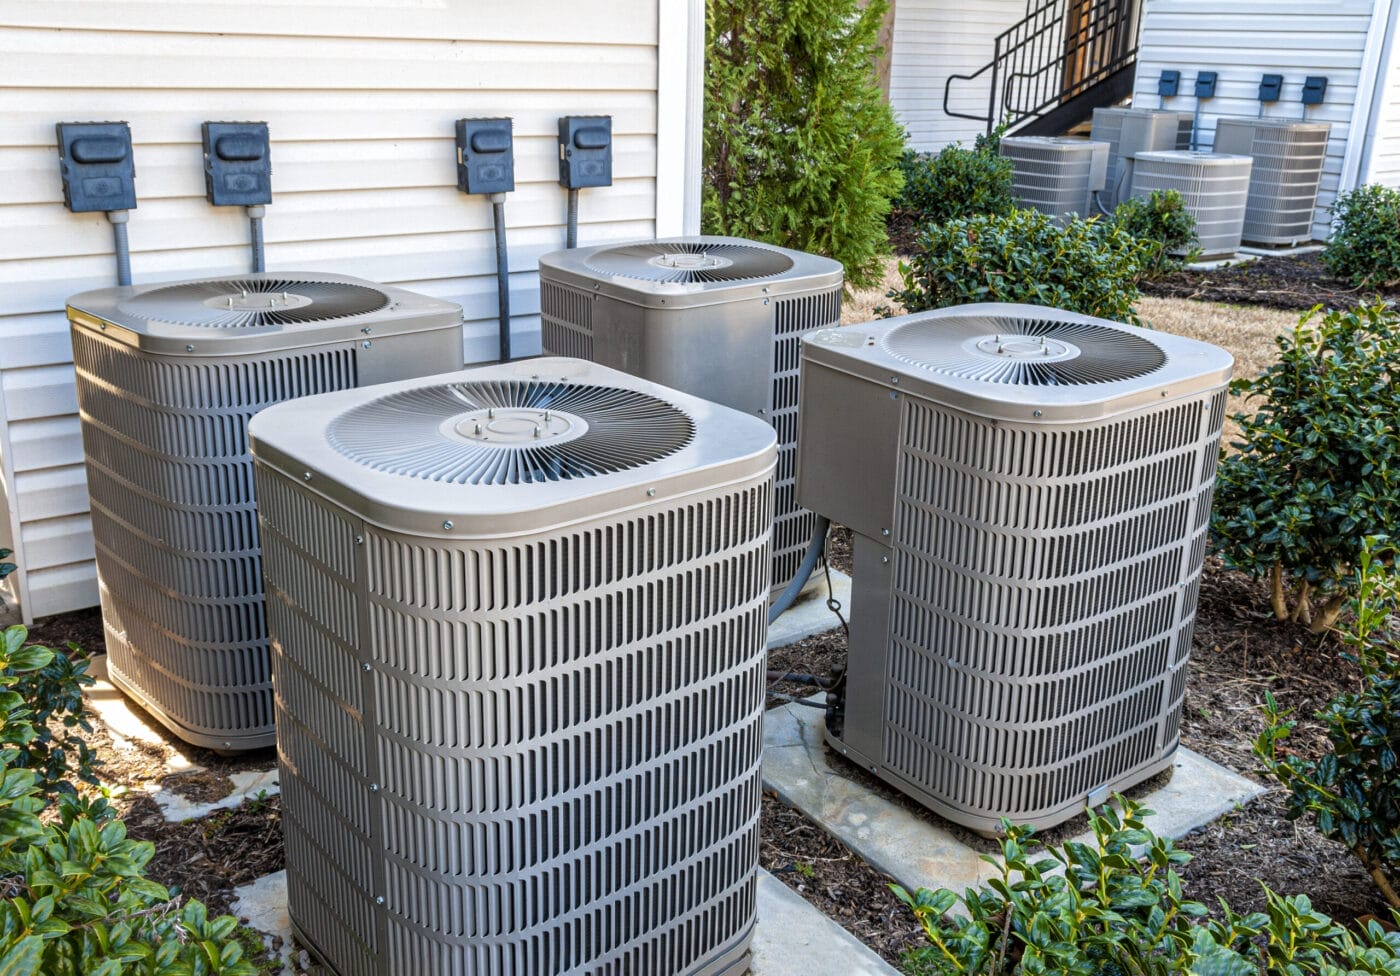 HVAC Units Connected to Apartments in Gulf Shores Al